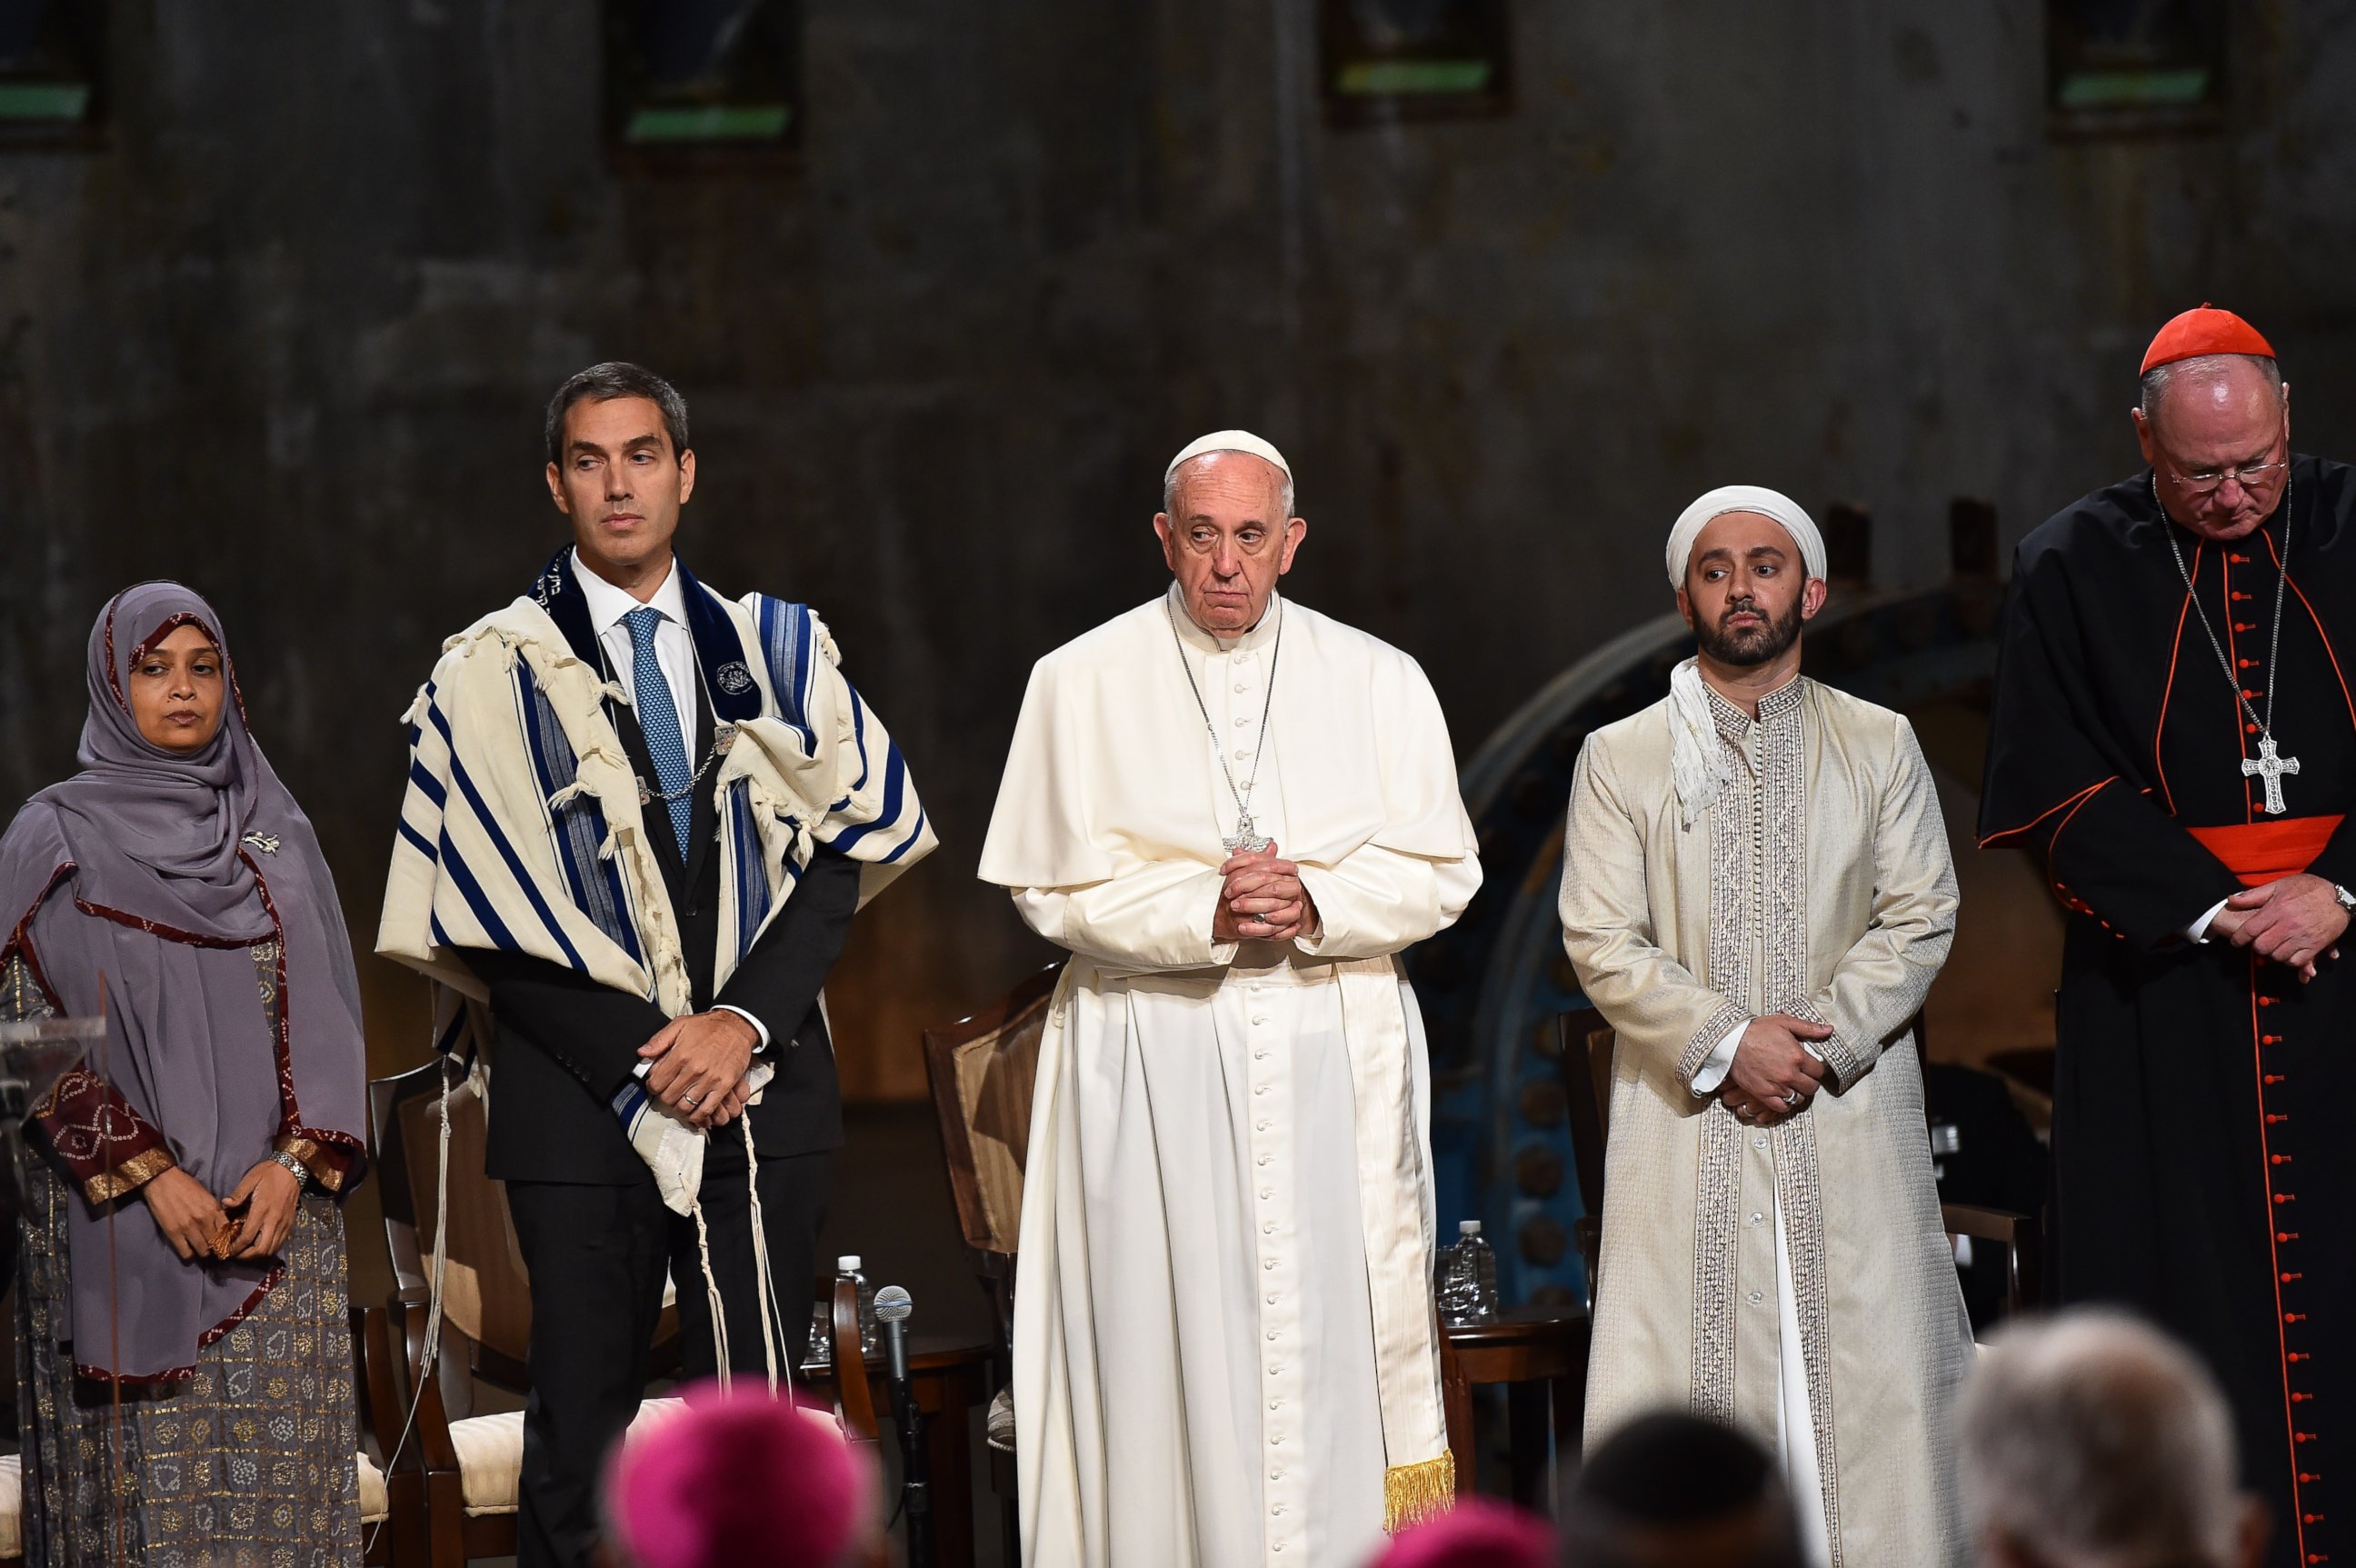 PHOTO: Pope Francis attends a multi-religious service for the victims of 9/11 at the memorial in New York on Sept. 25, 2015.  